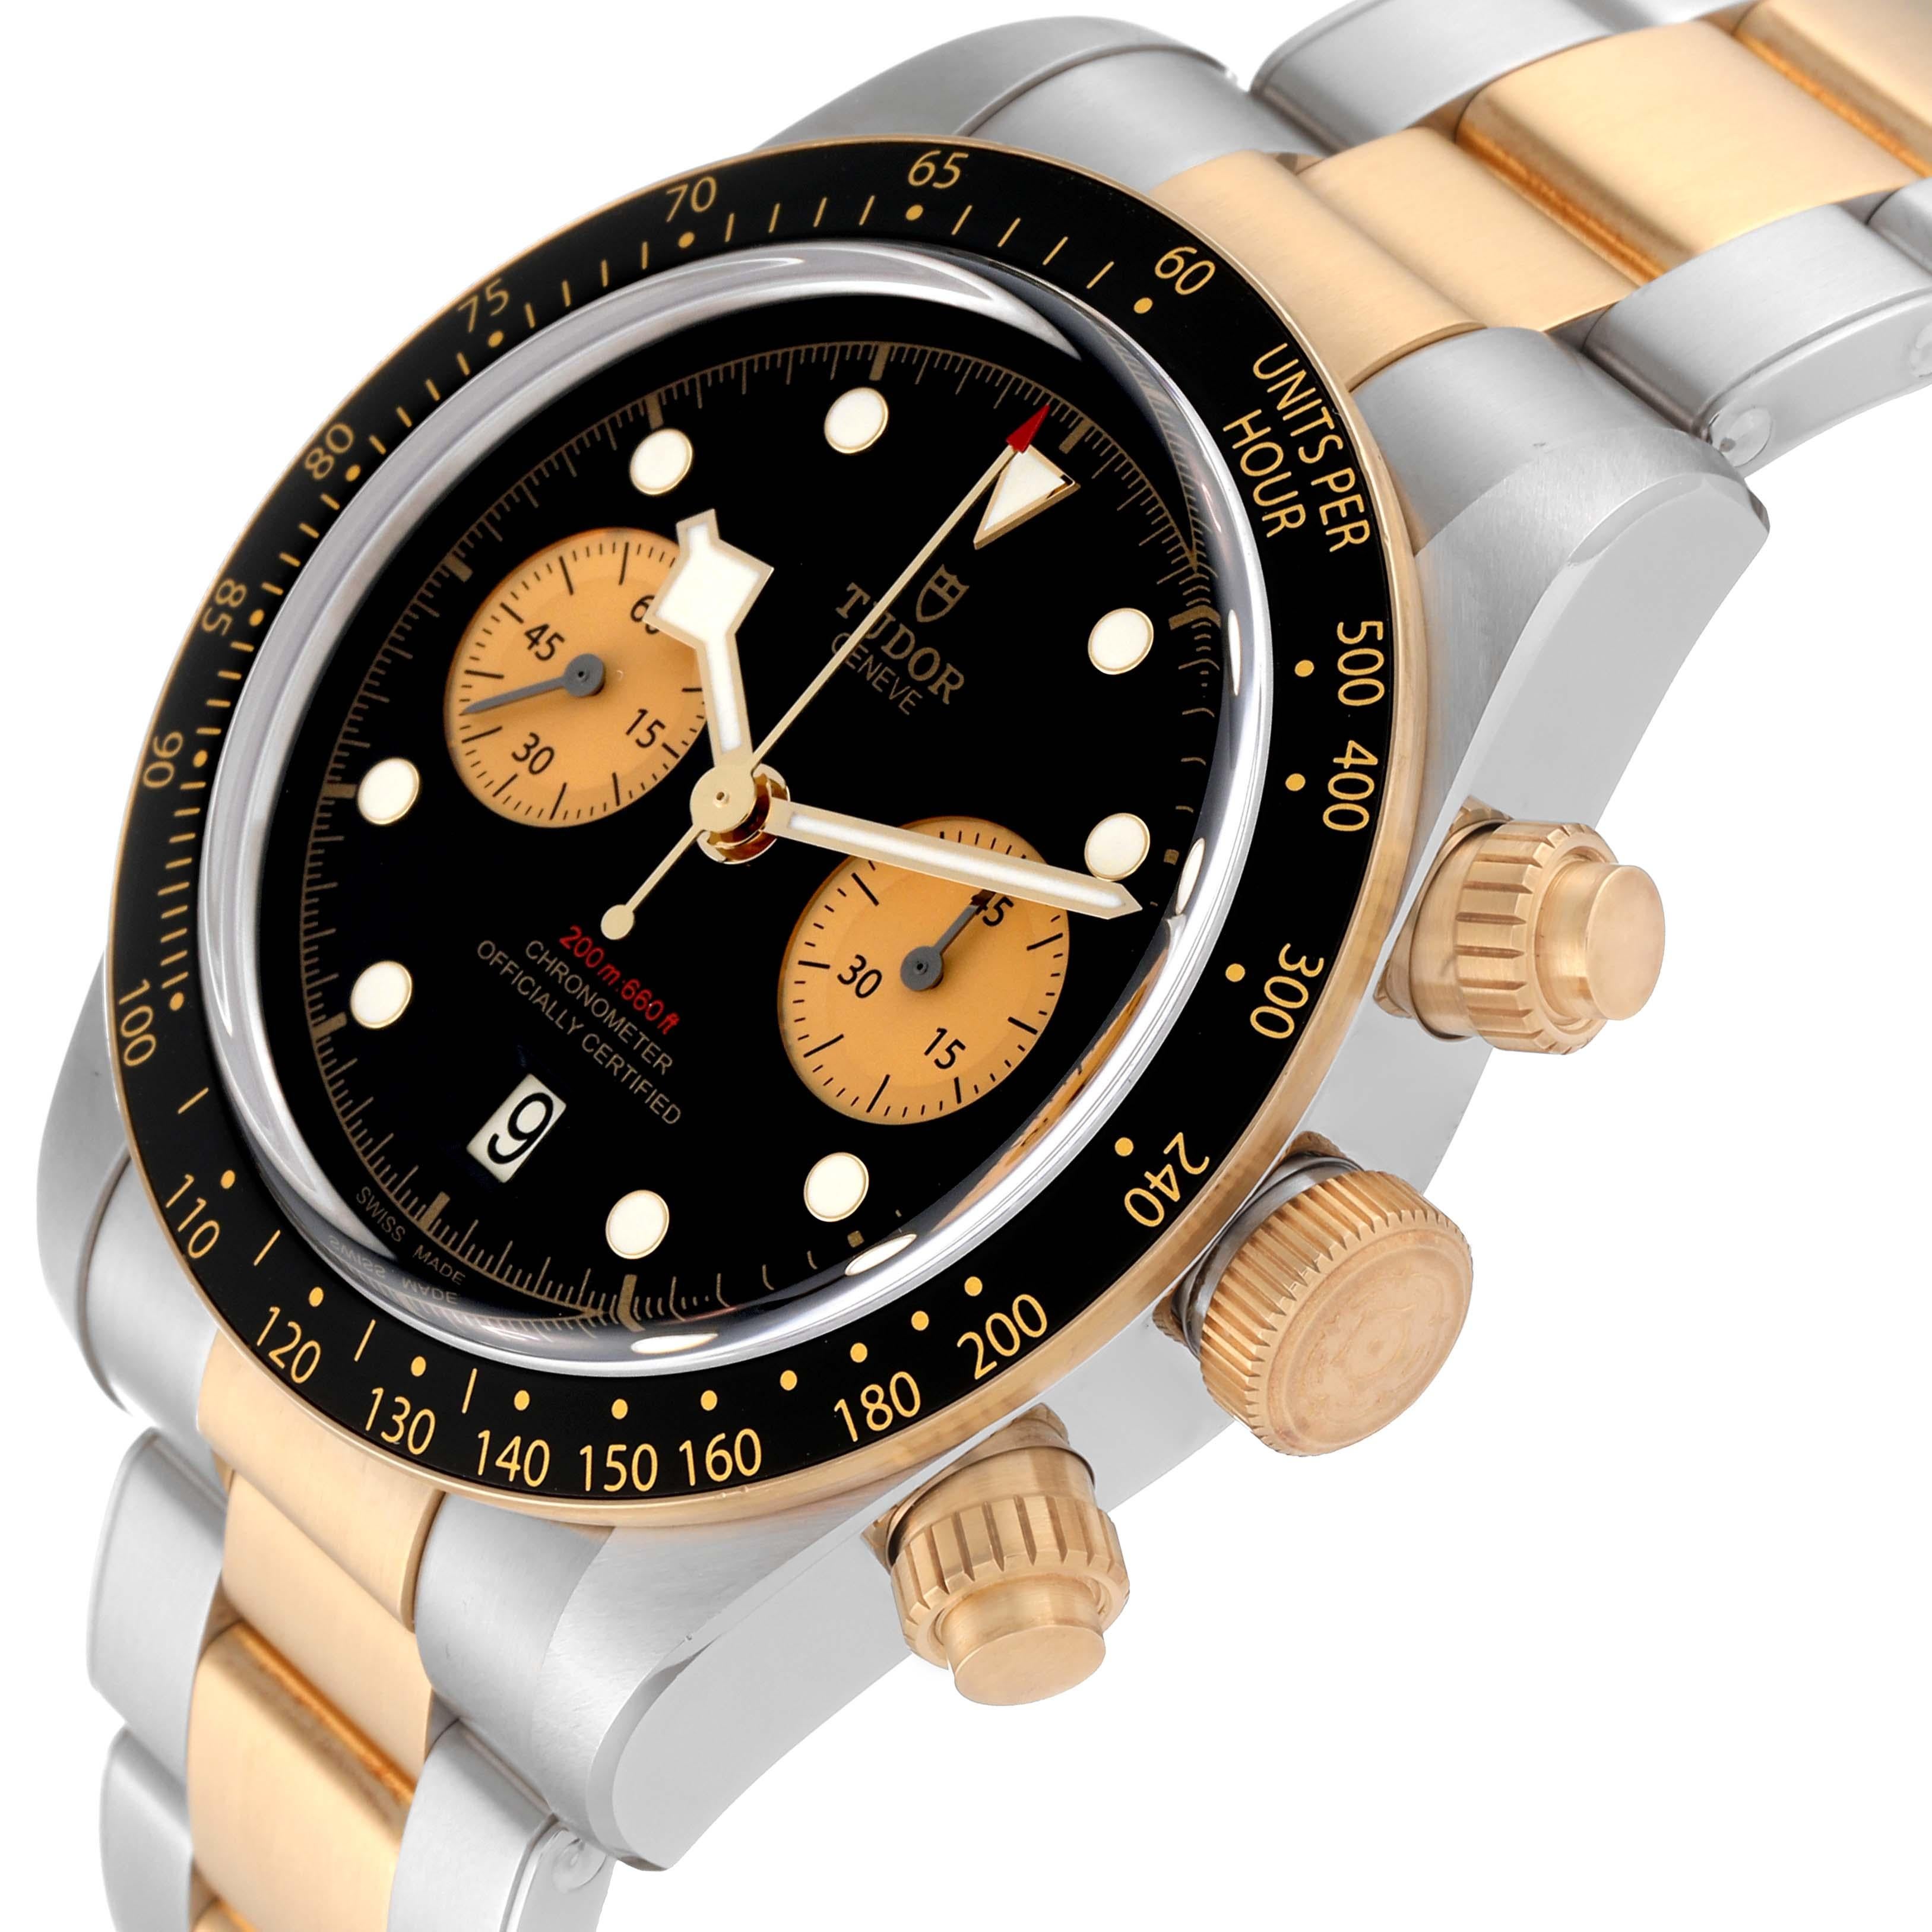 Tudor Heritage Black Bay Steel Yellow Gold Mens Watch 79363 Box Card. Automatic self-winding movement. Stainless steel and 18k yellow gold oyster case 41 mm in diameter. Tudor logo on a crown. 18k yellow gold bezel with a black anodised aluminium